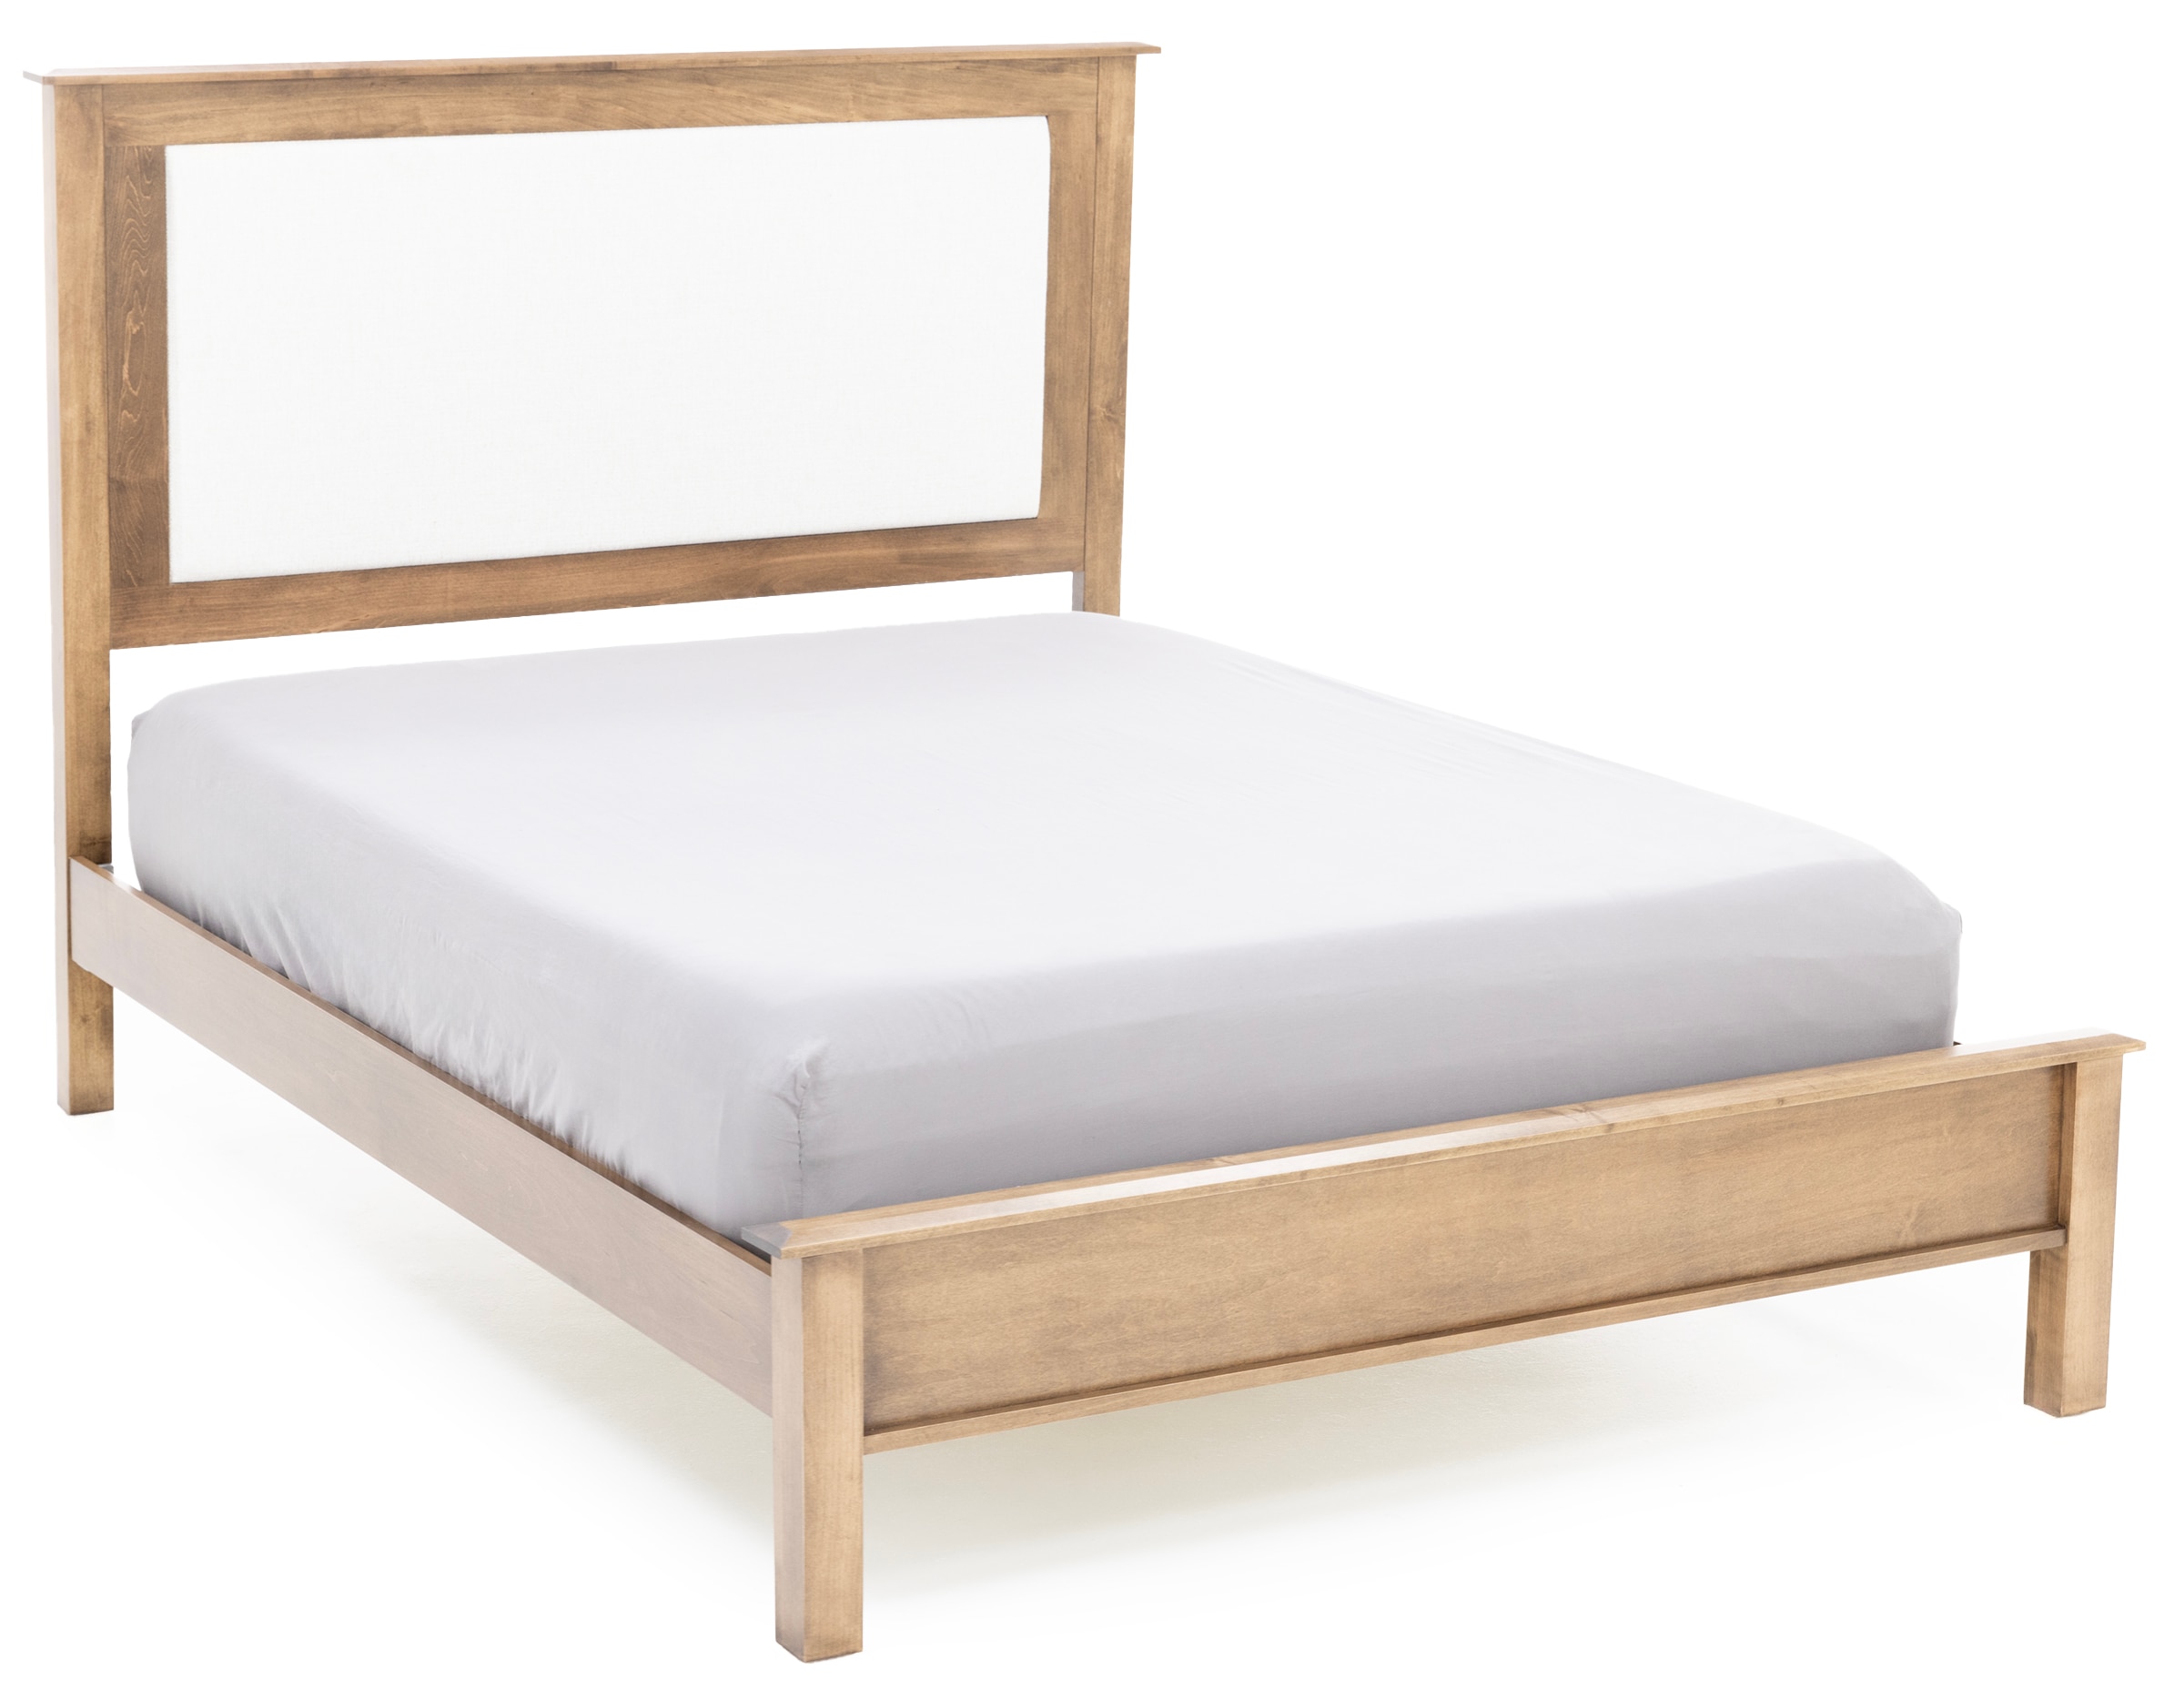 Daniel's Amish Manchester Queen Upholstered Headboard Bed